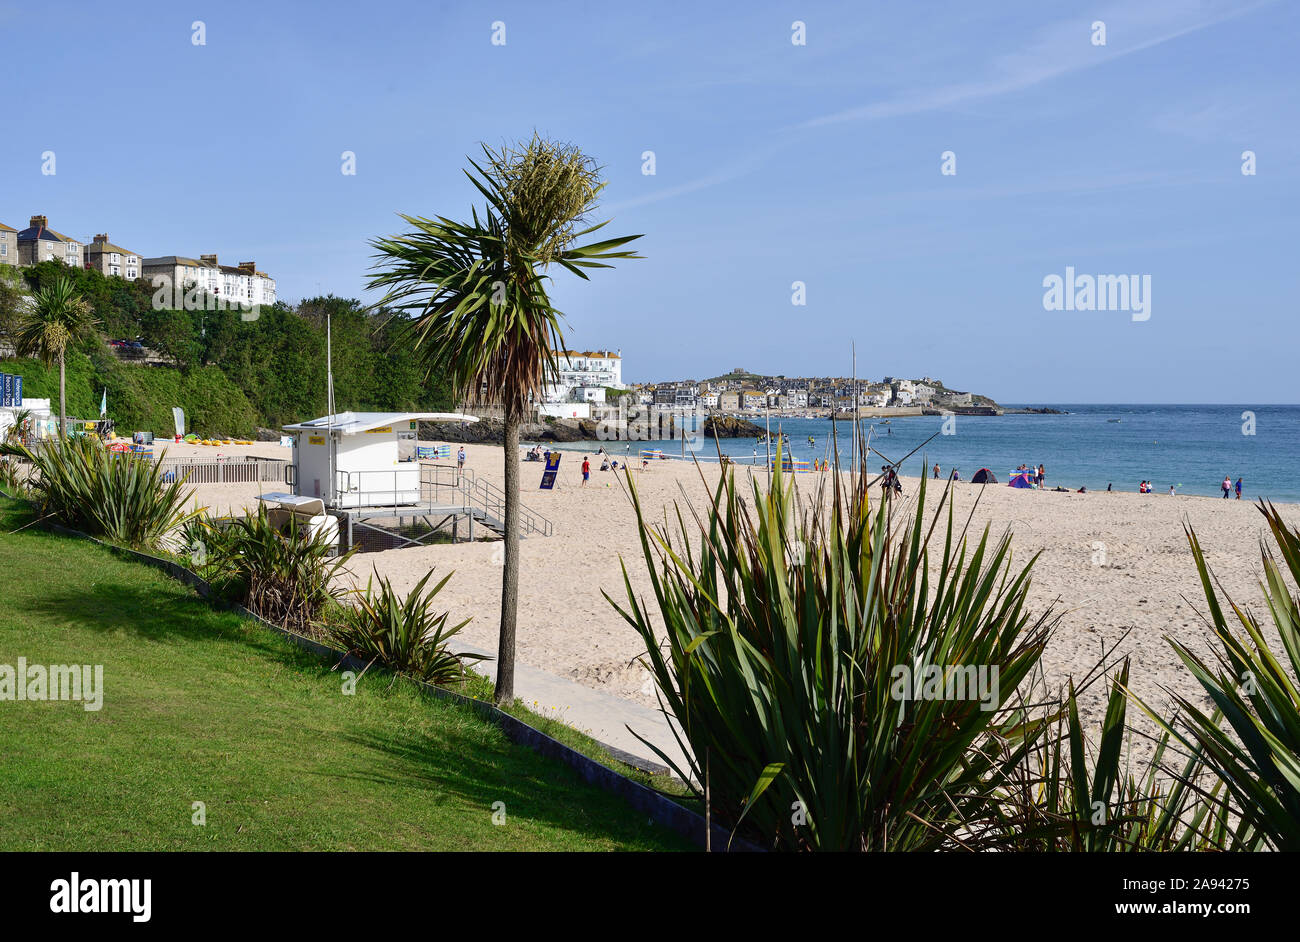 Porthminster Beach, St Ives, early morning with few people about. The vegetation suggests somewhere more tropical. Stock Photo